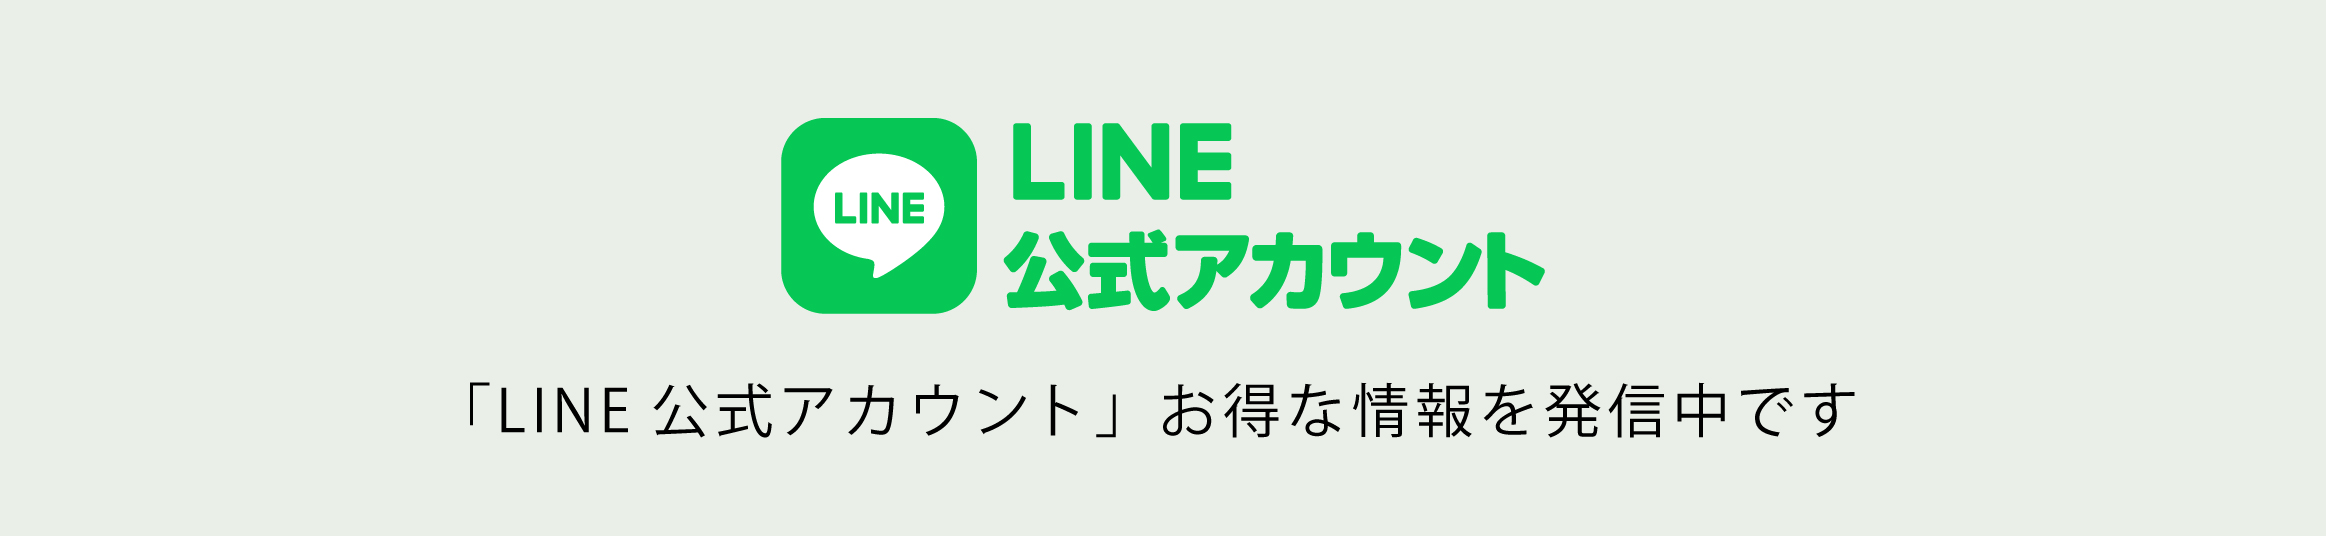 OFFICIAL LINE